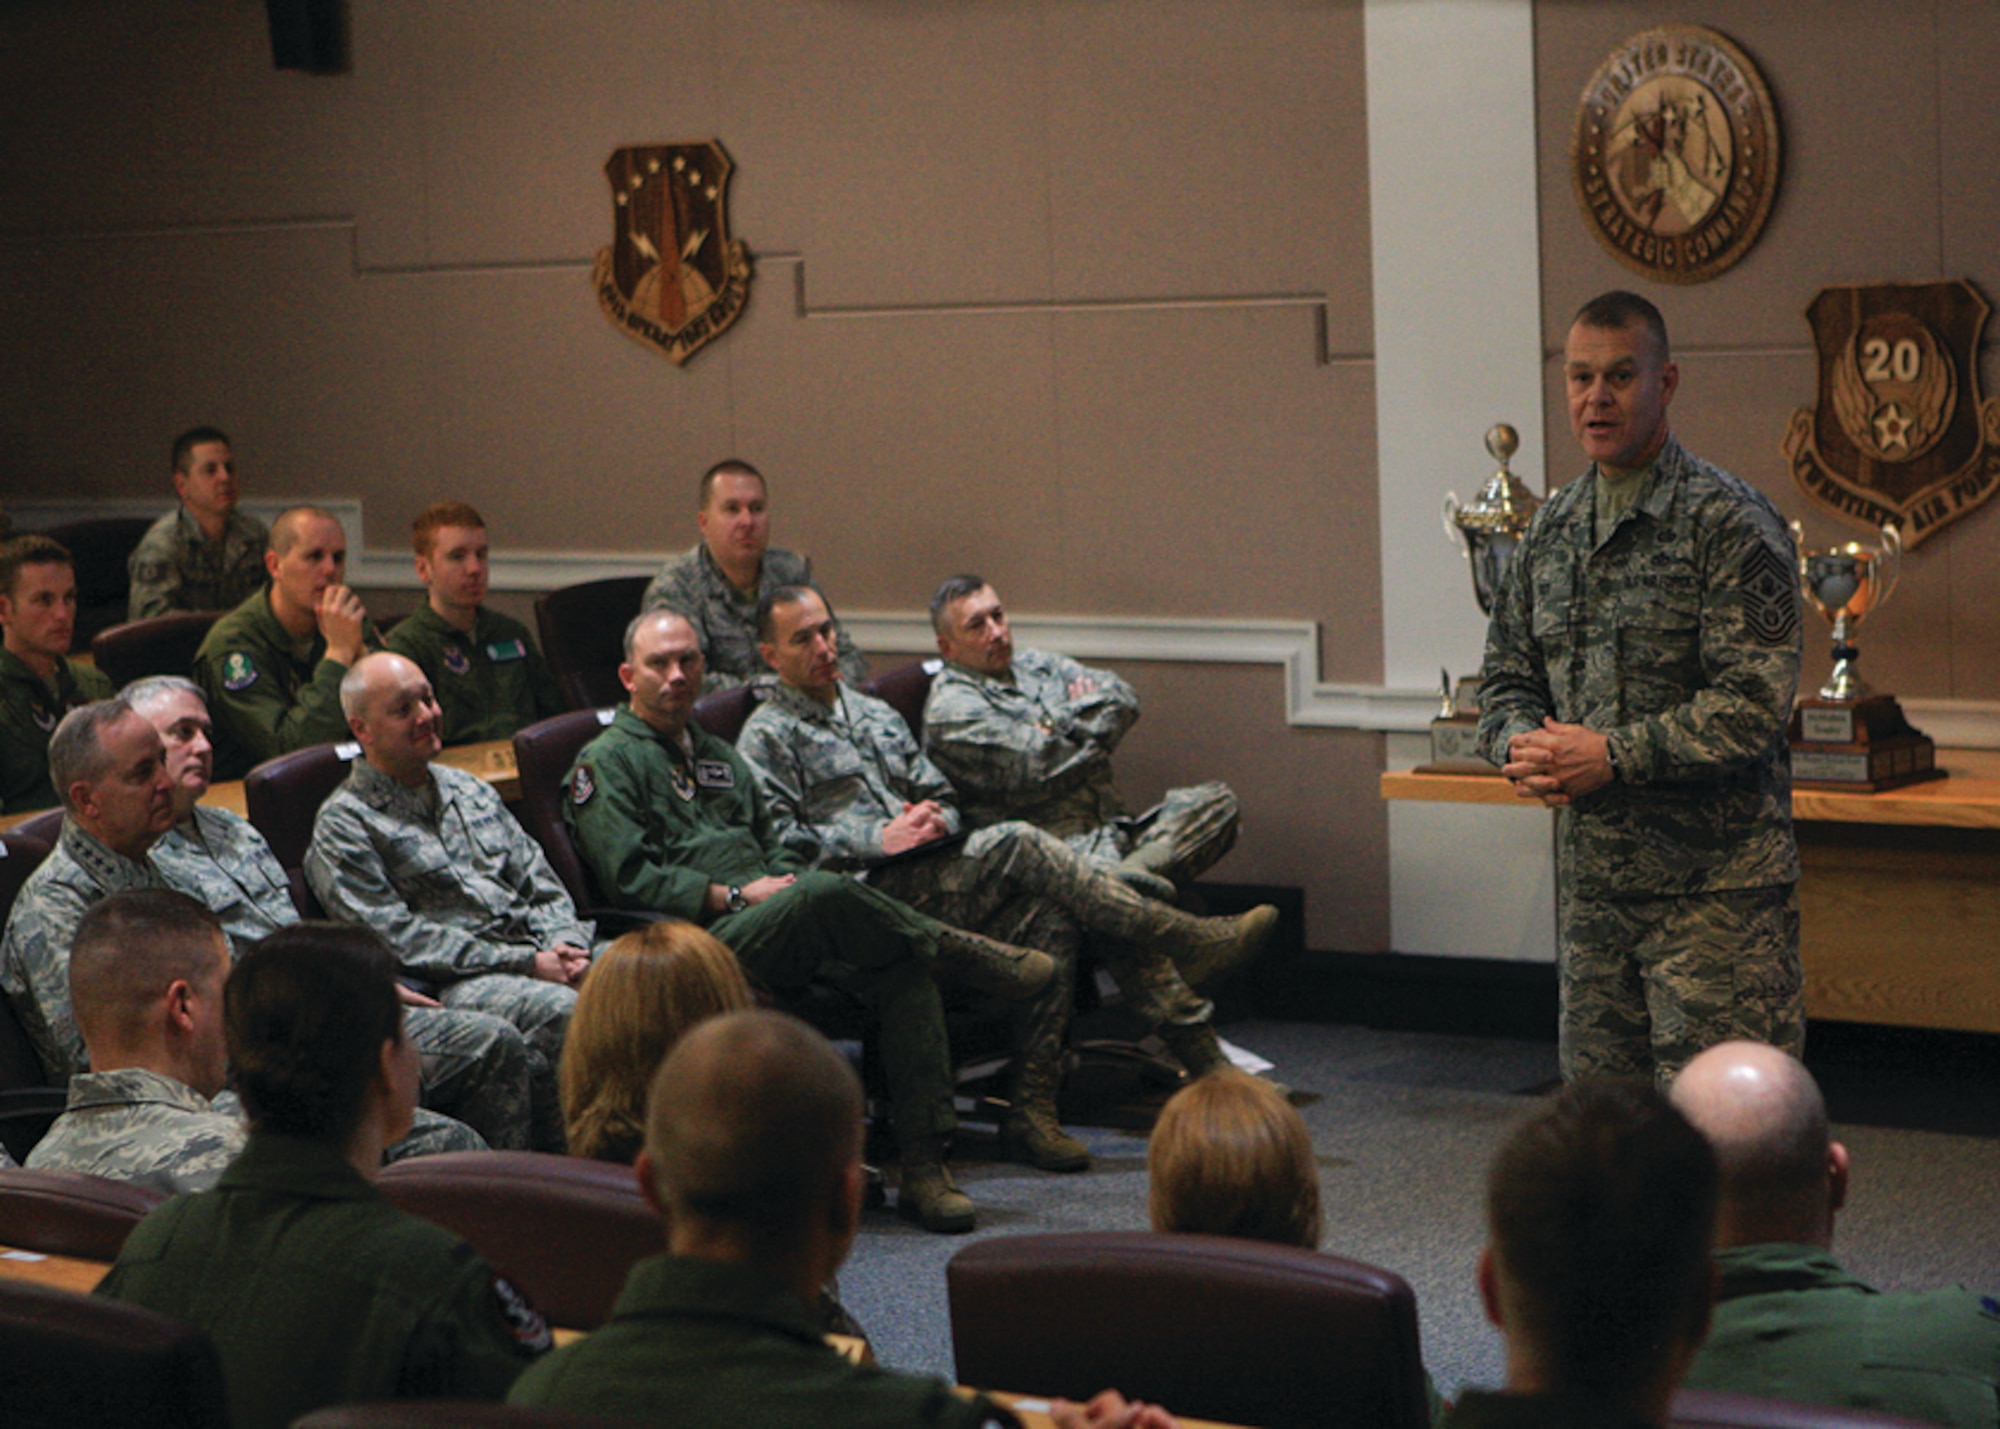 Chief Master Sgt. of the Air Force James Roy speaks to Warren Airmen during a pre-departure briefing Nov. 19, at F. E. Warren Air Force Base, Wyo. Roy is accompanying Air Force Chief of Staff Gen. Mark A. Welsh III during Welsh's first tour of the nation’s intercontinental ballistic missile force as the chief of staff. (U.S. Air Force photo by Matt Bilden)